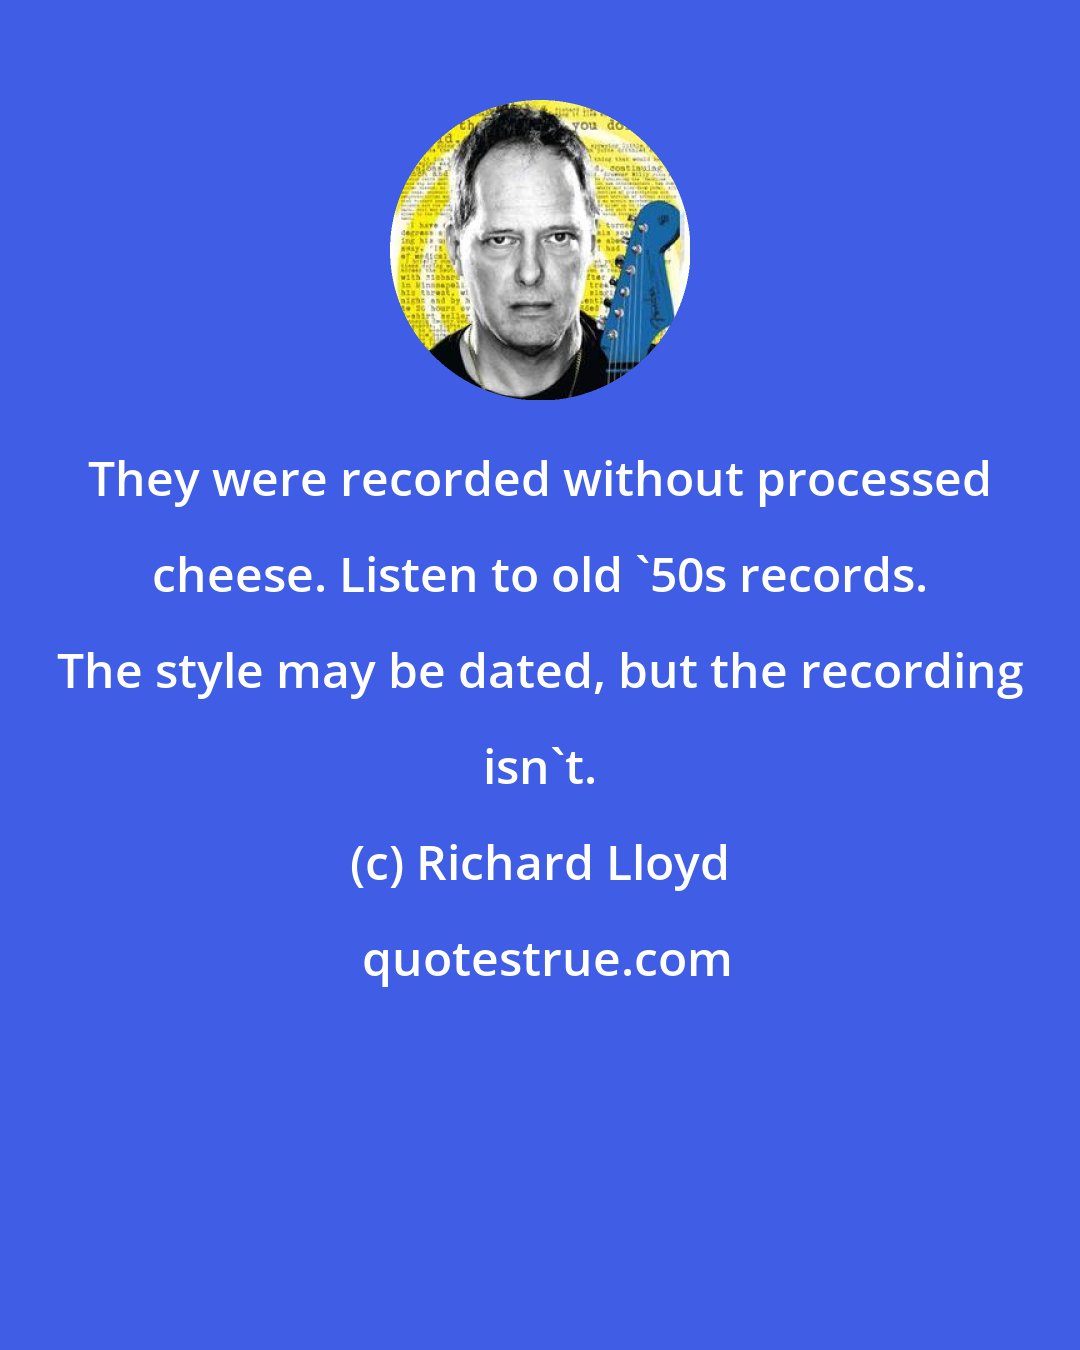 Richard Lloyd: They were recorded without processed cheese. Listen to old '50s records. The style may be dated, but the recording isn't.